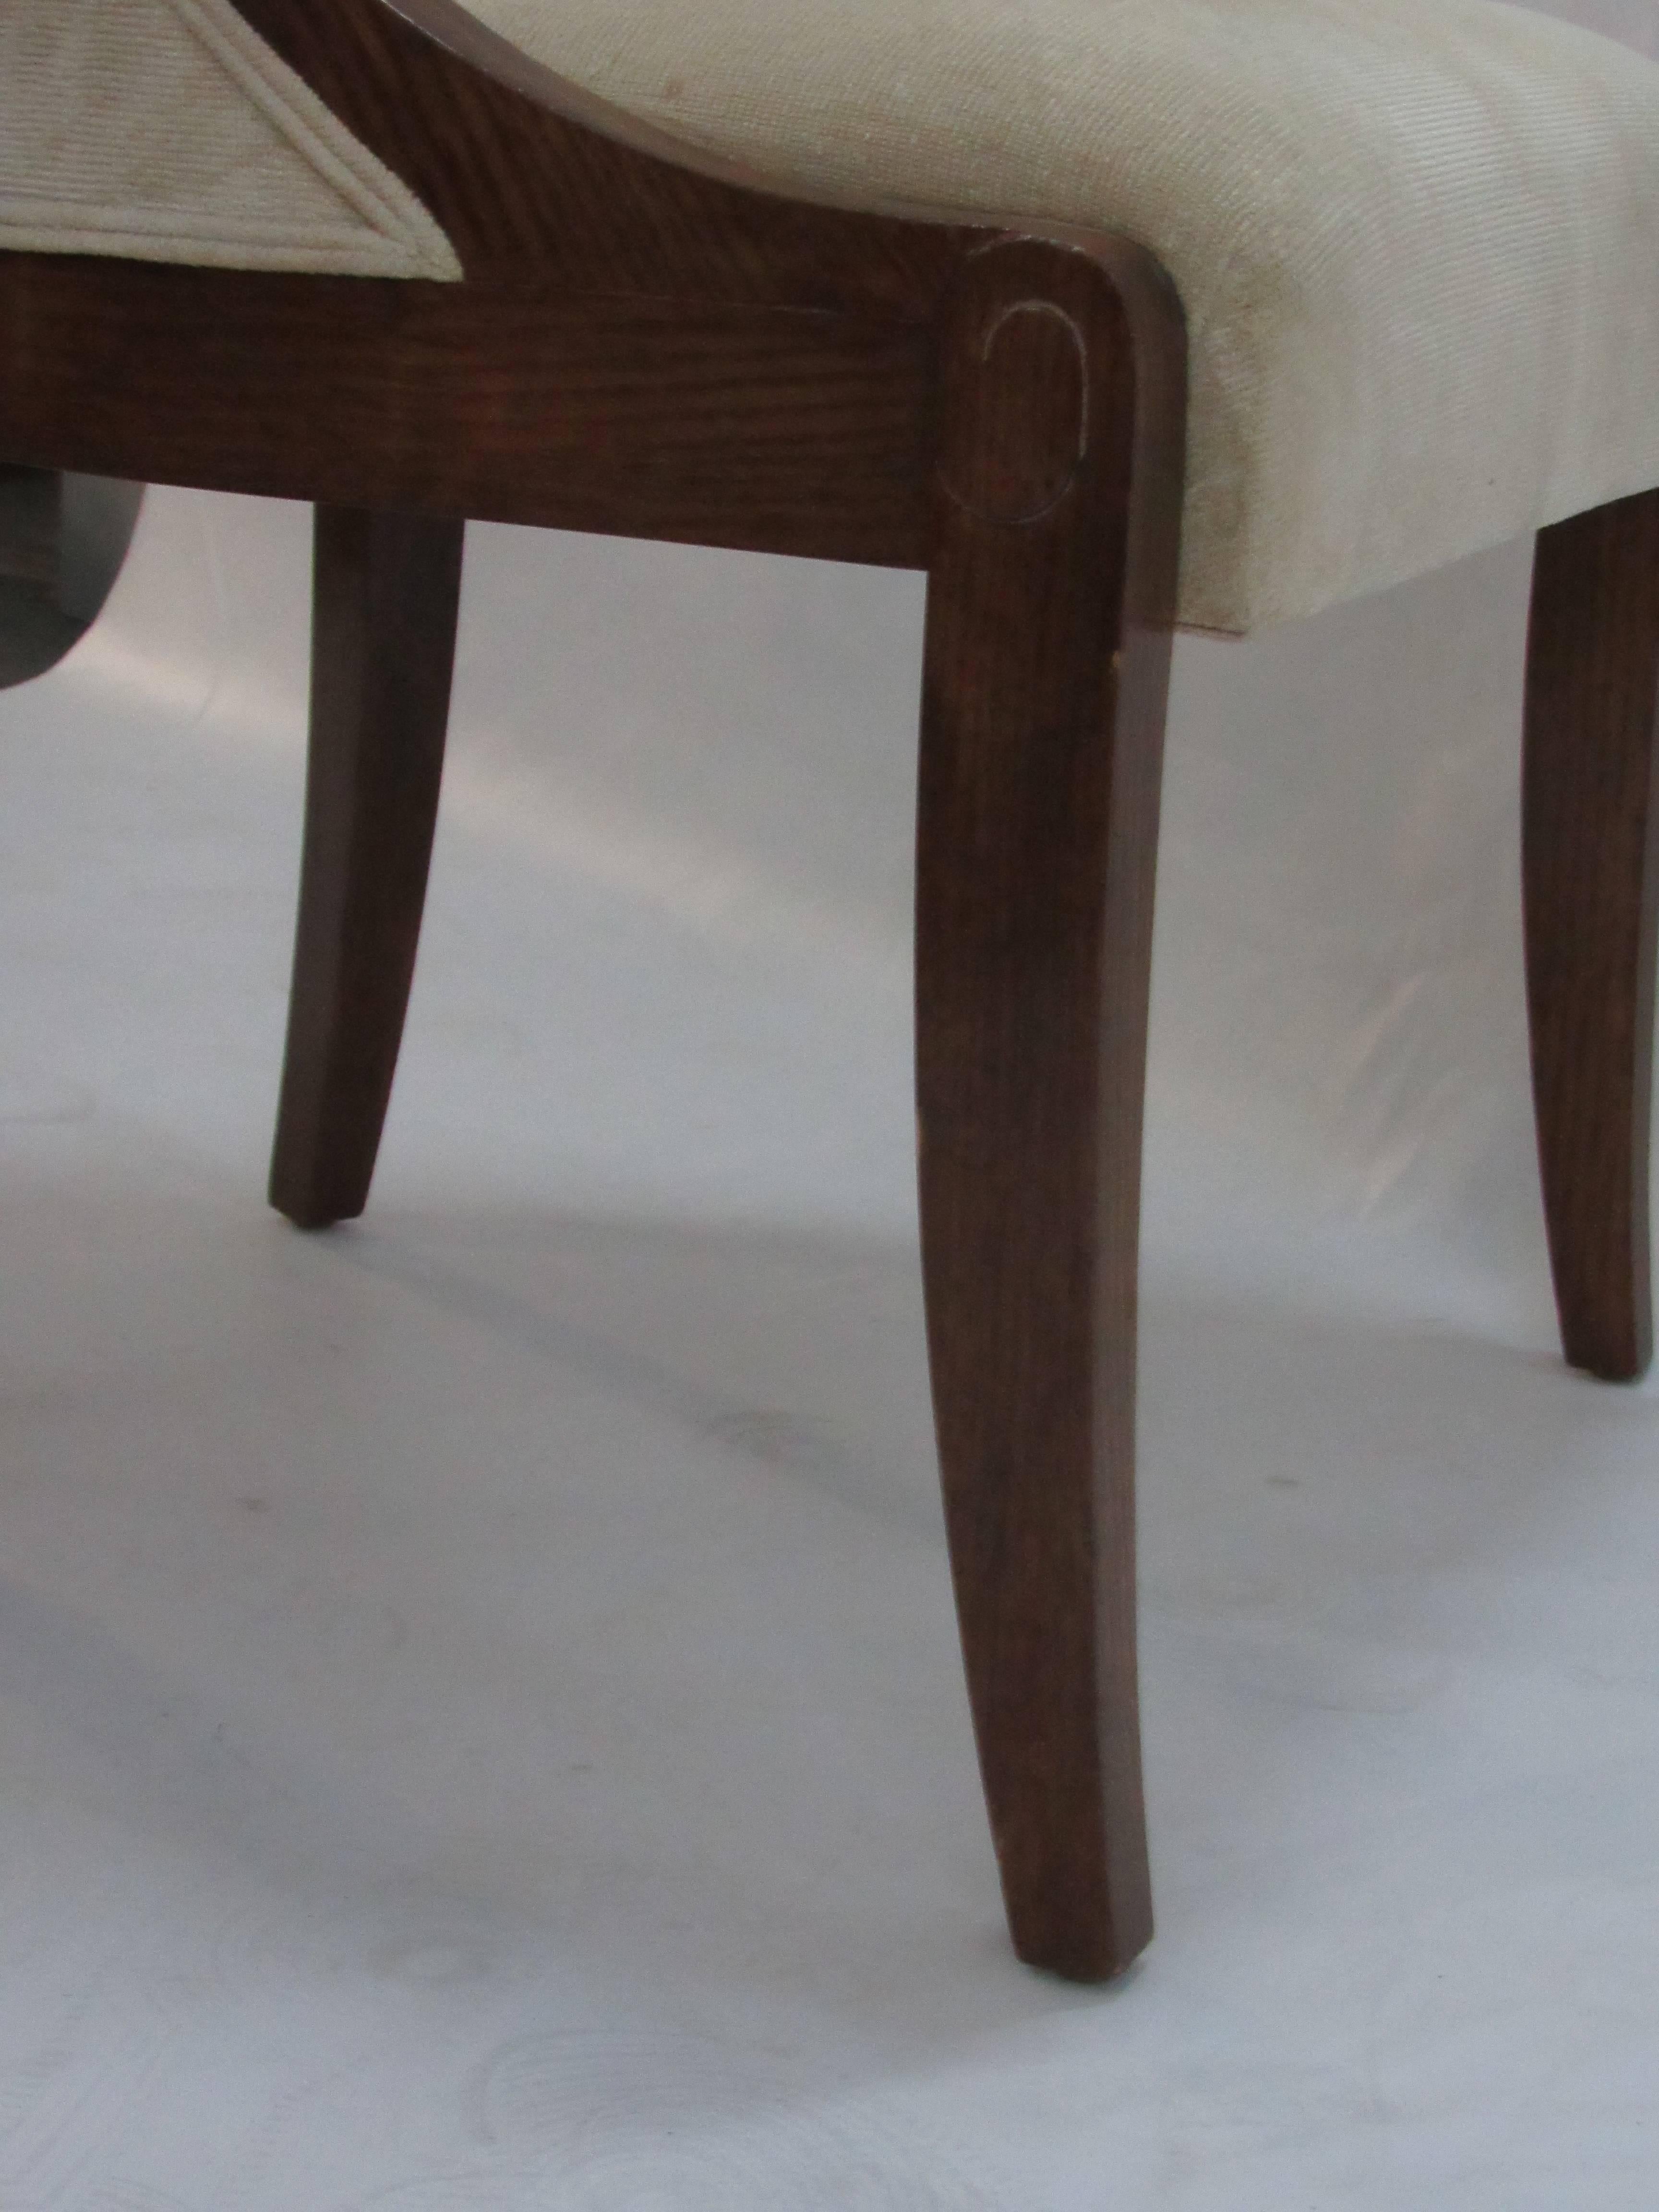 Directoire Contemporary Ram's Chair Created by J. Robert Scott Designed by Peter Marino For Sale